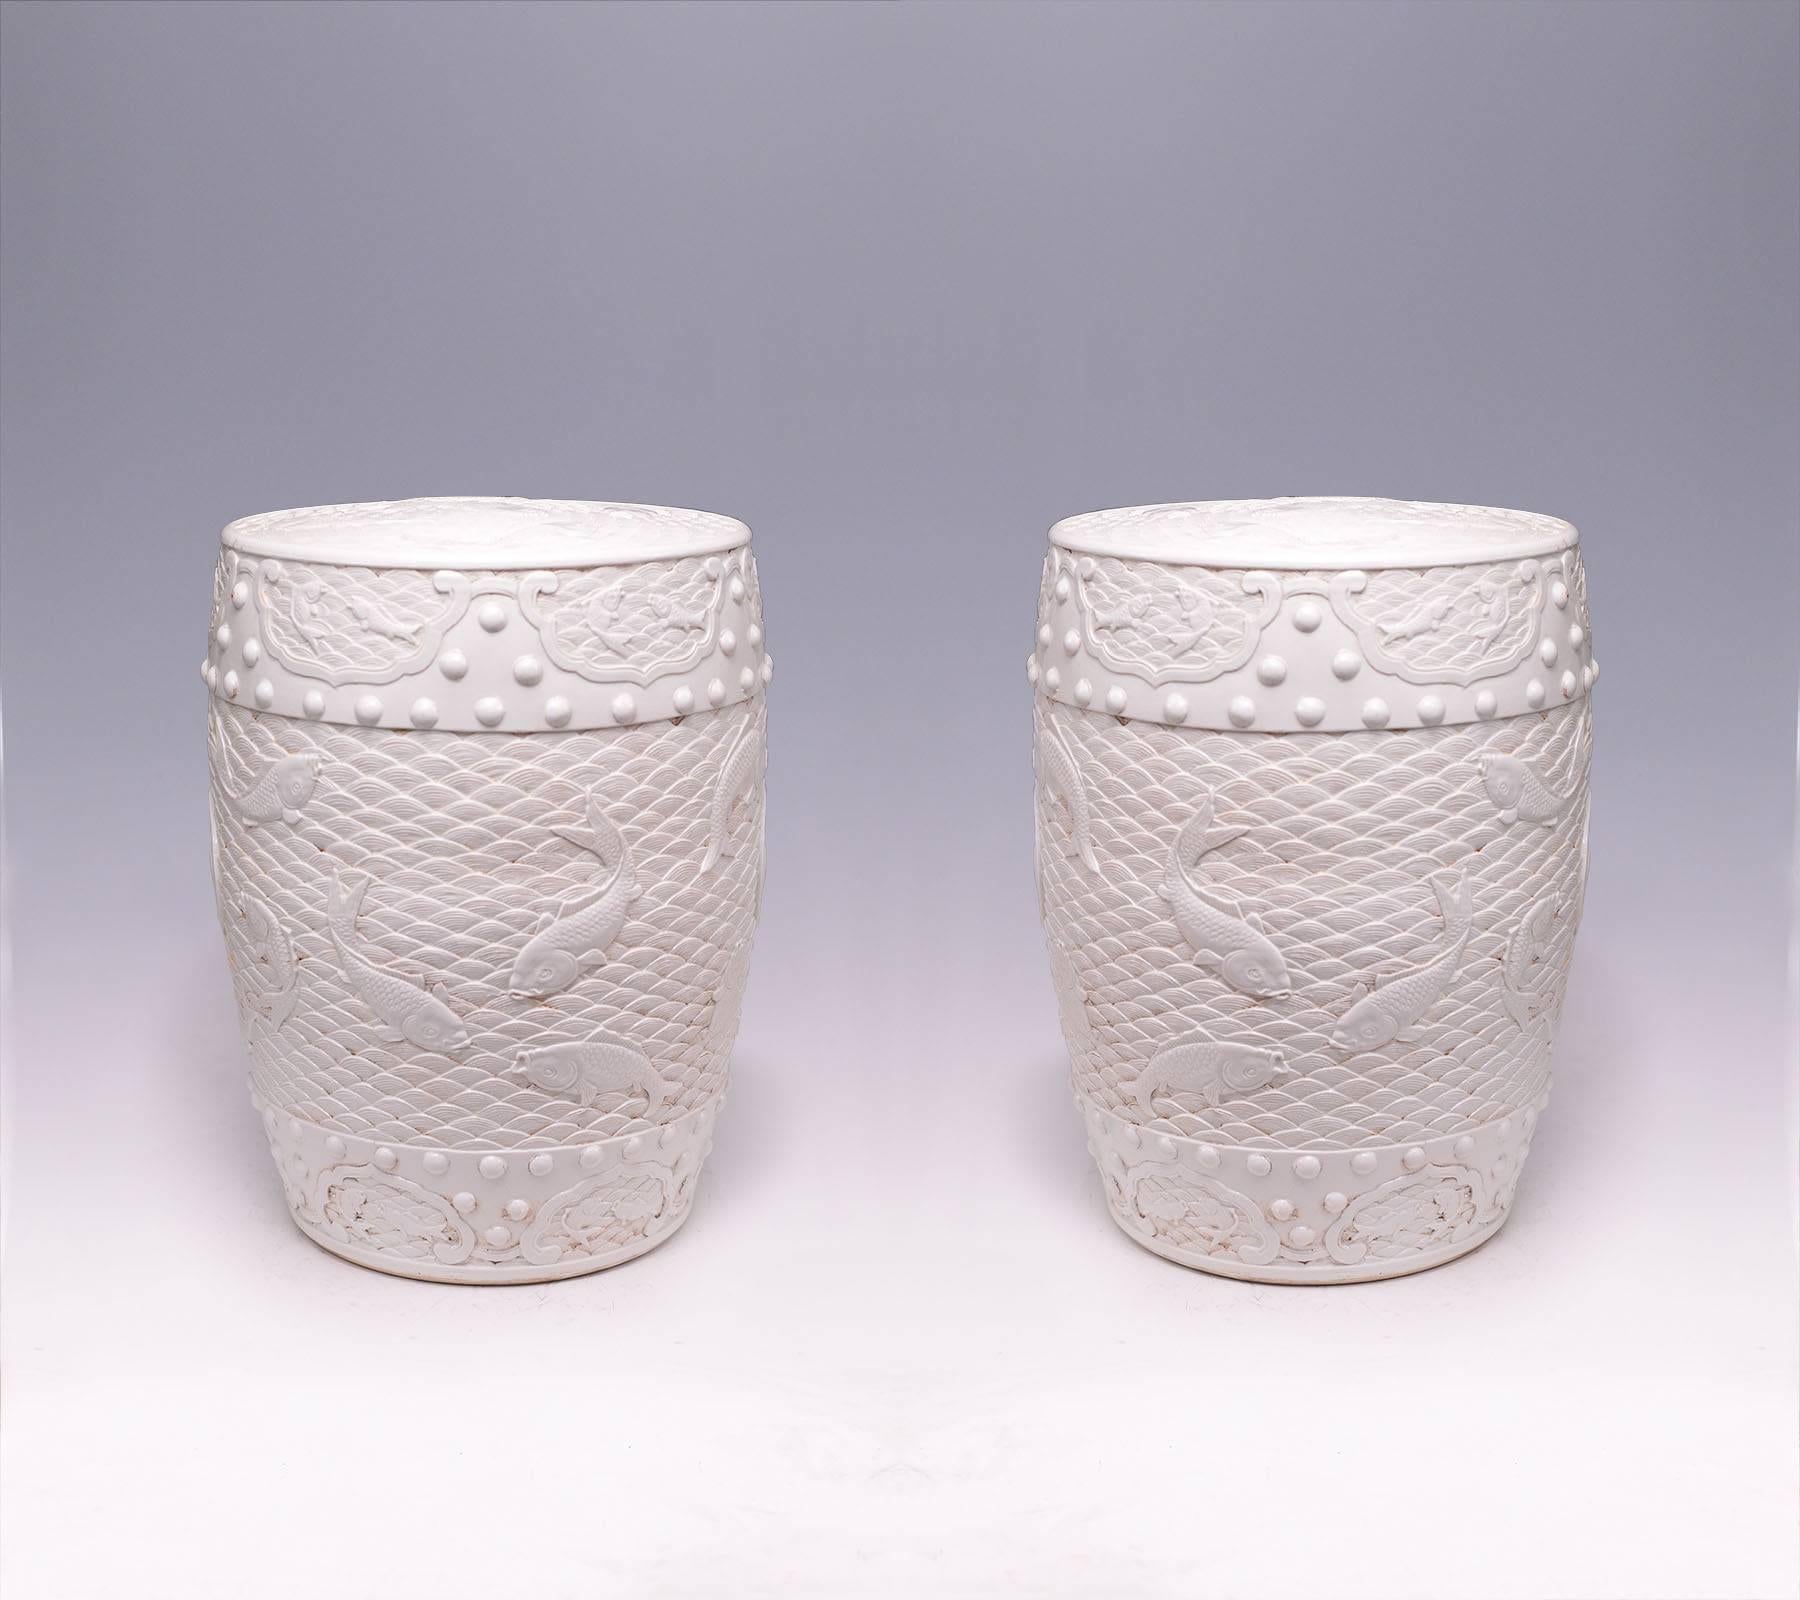 Pair of fine carved Blanc-de-chine porcelain stools with swimming fish decoration.